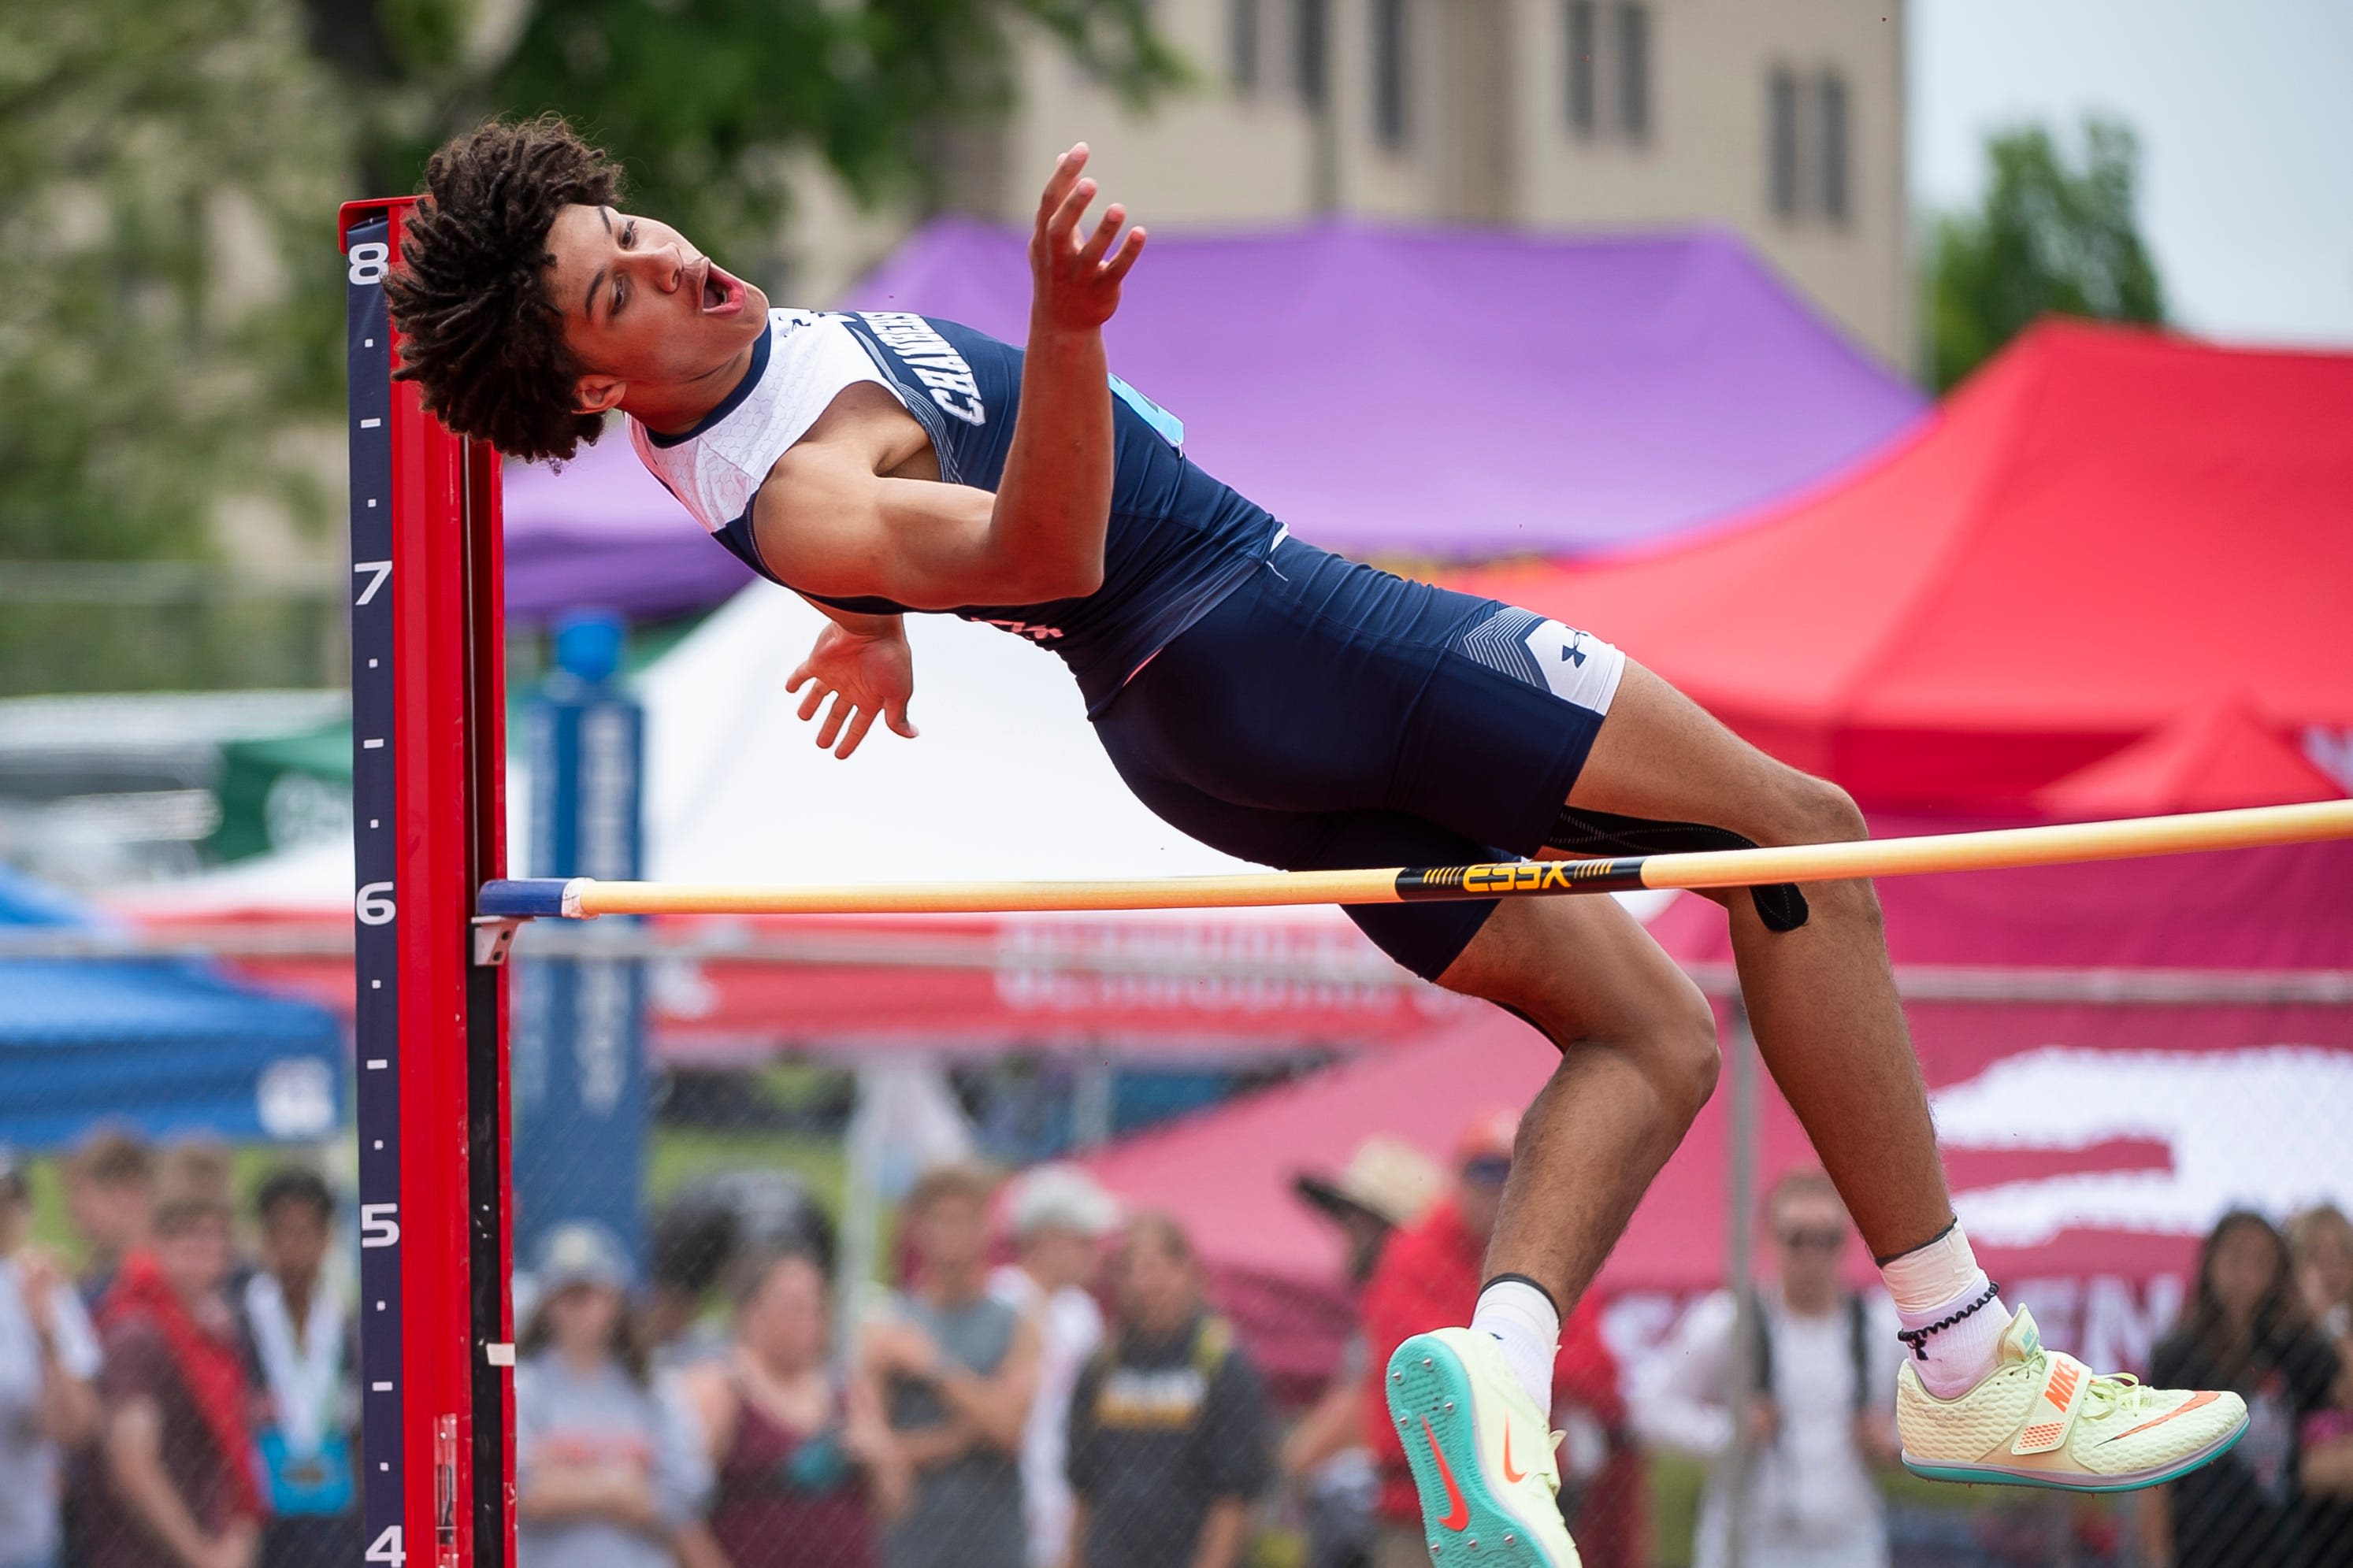 These athletes are contenders to strike gold at the District 3 track and field meet